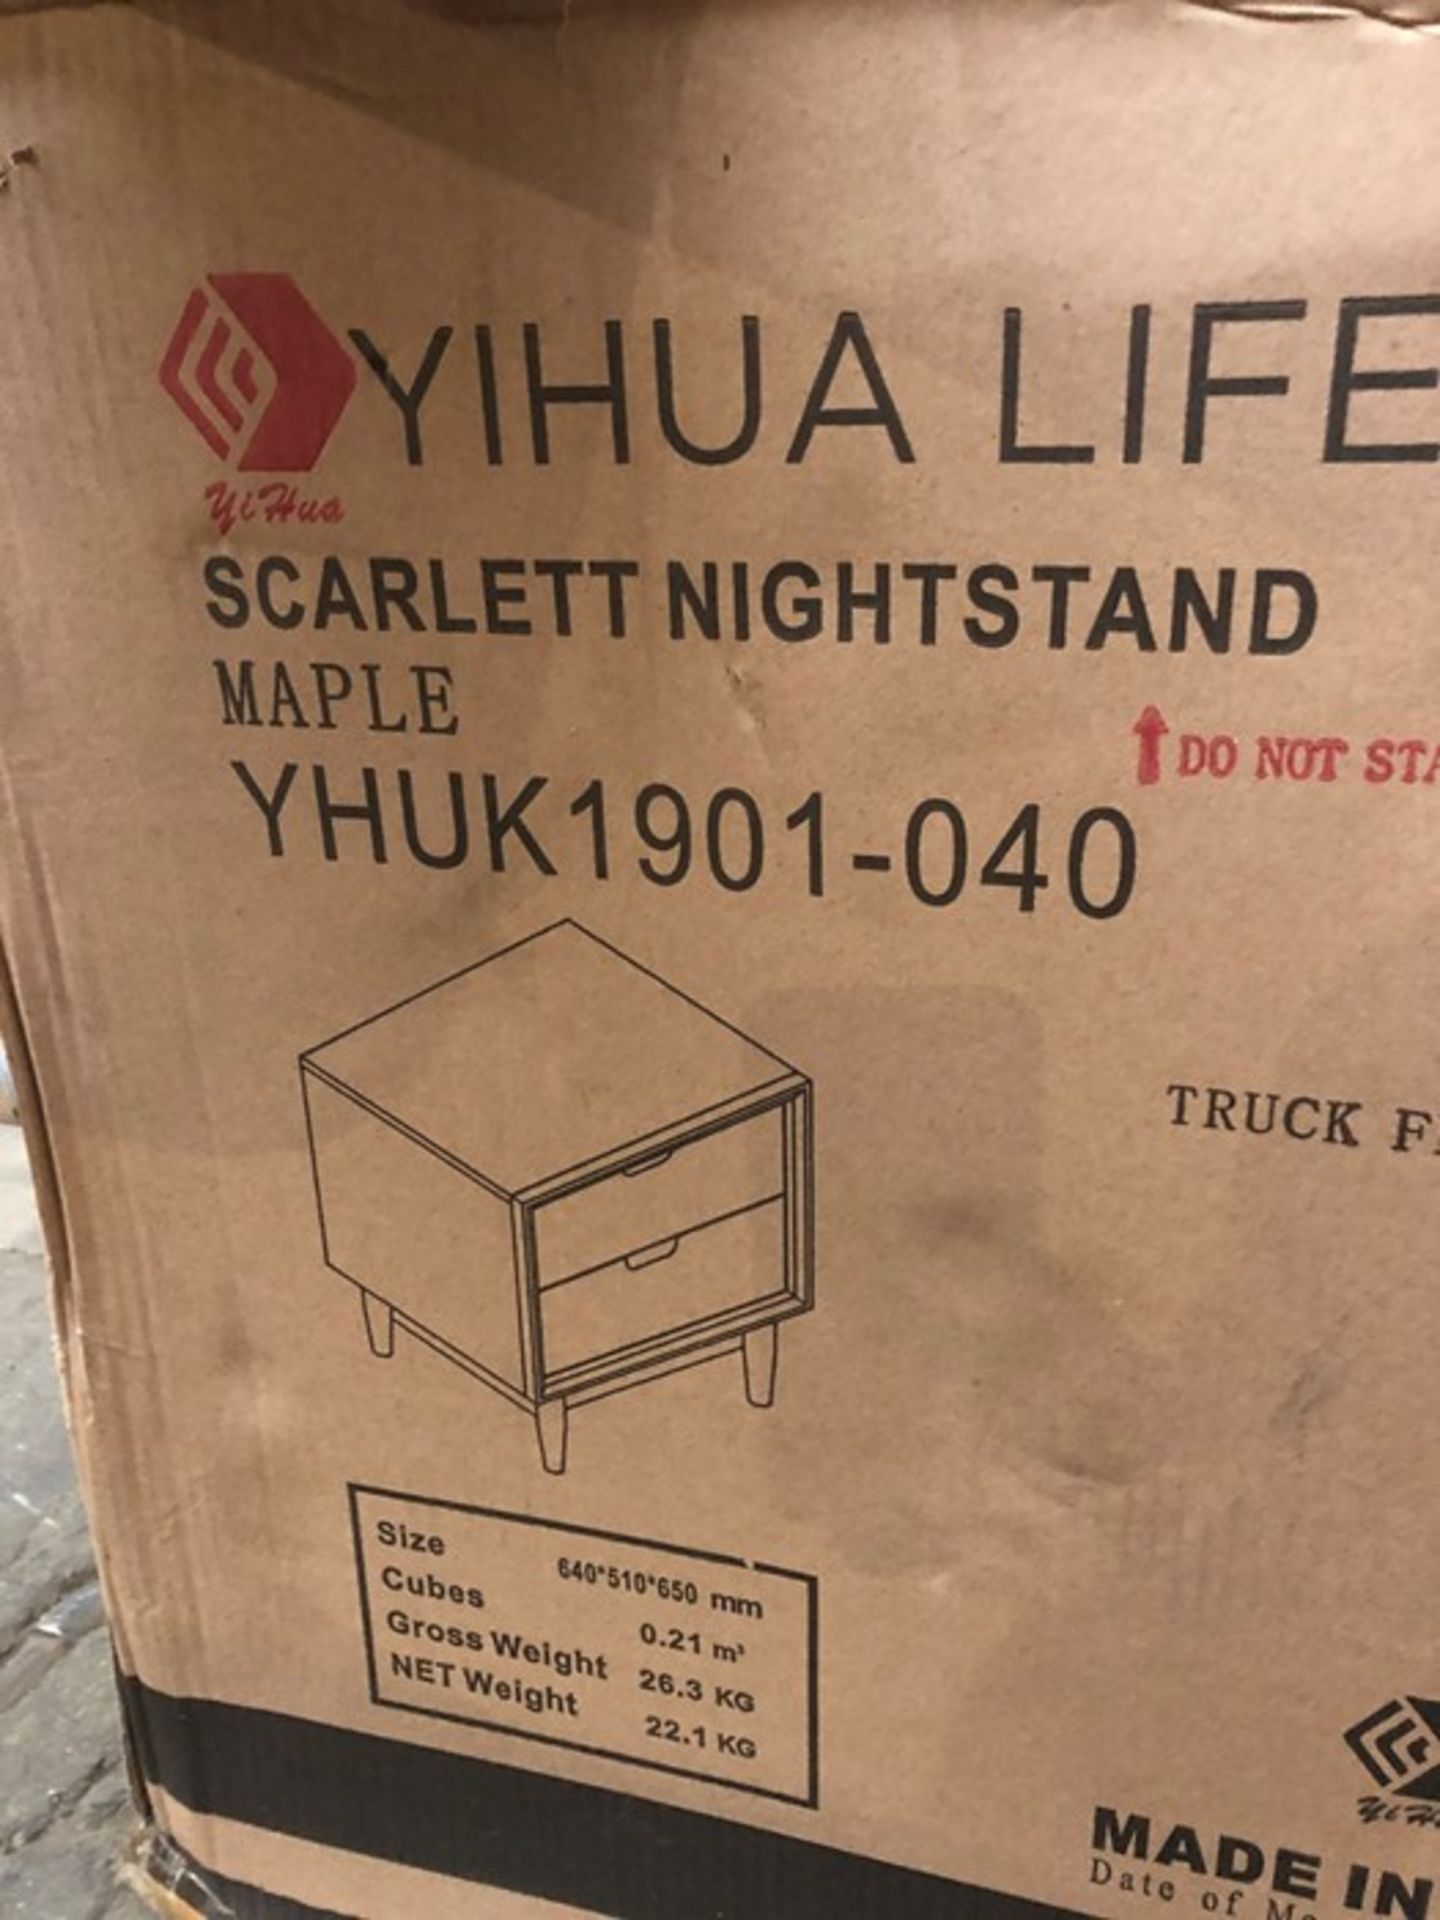 1 BOXED YIHAU LIFE SCARTLETT NIGHTSTAND IN MAPLE - YHUK 1901-040 (PUBLIC VIEWING AVAILABLE)